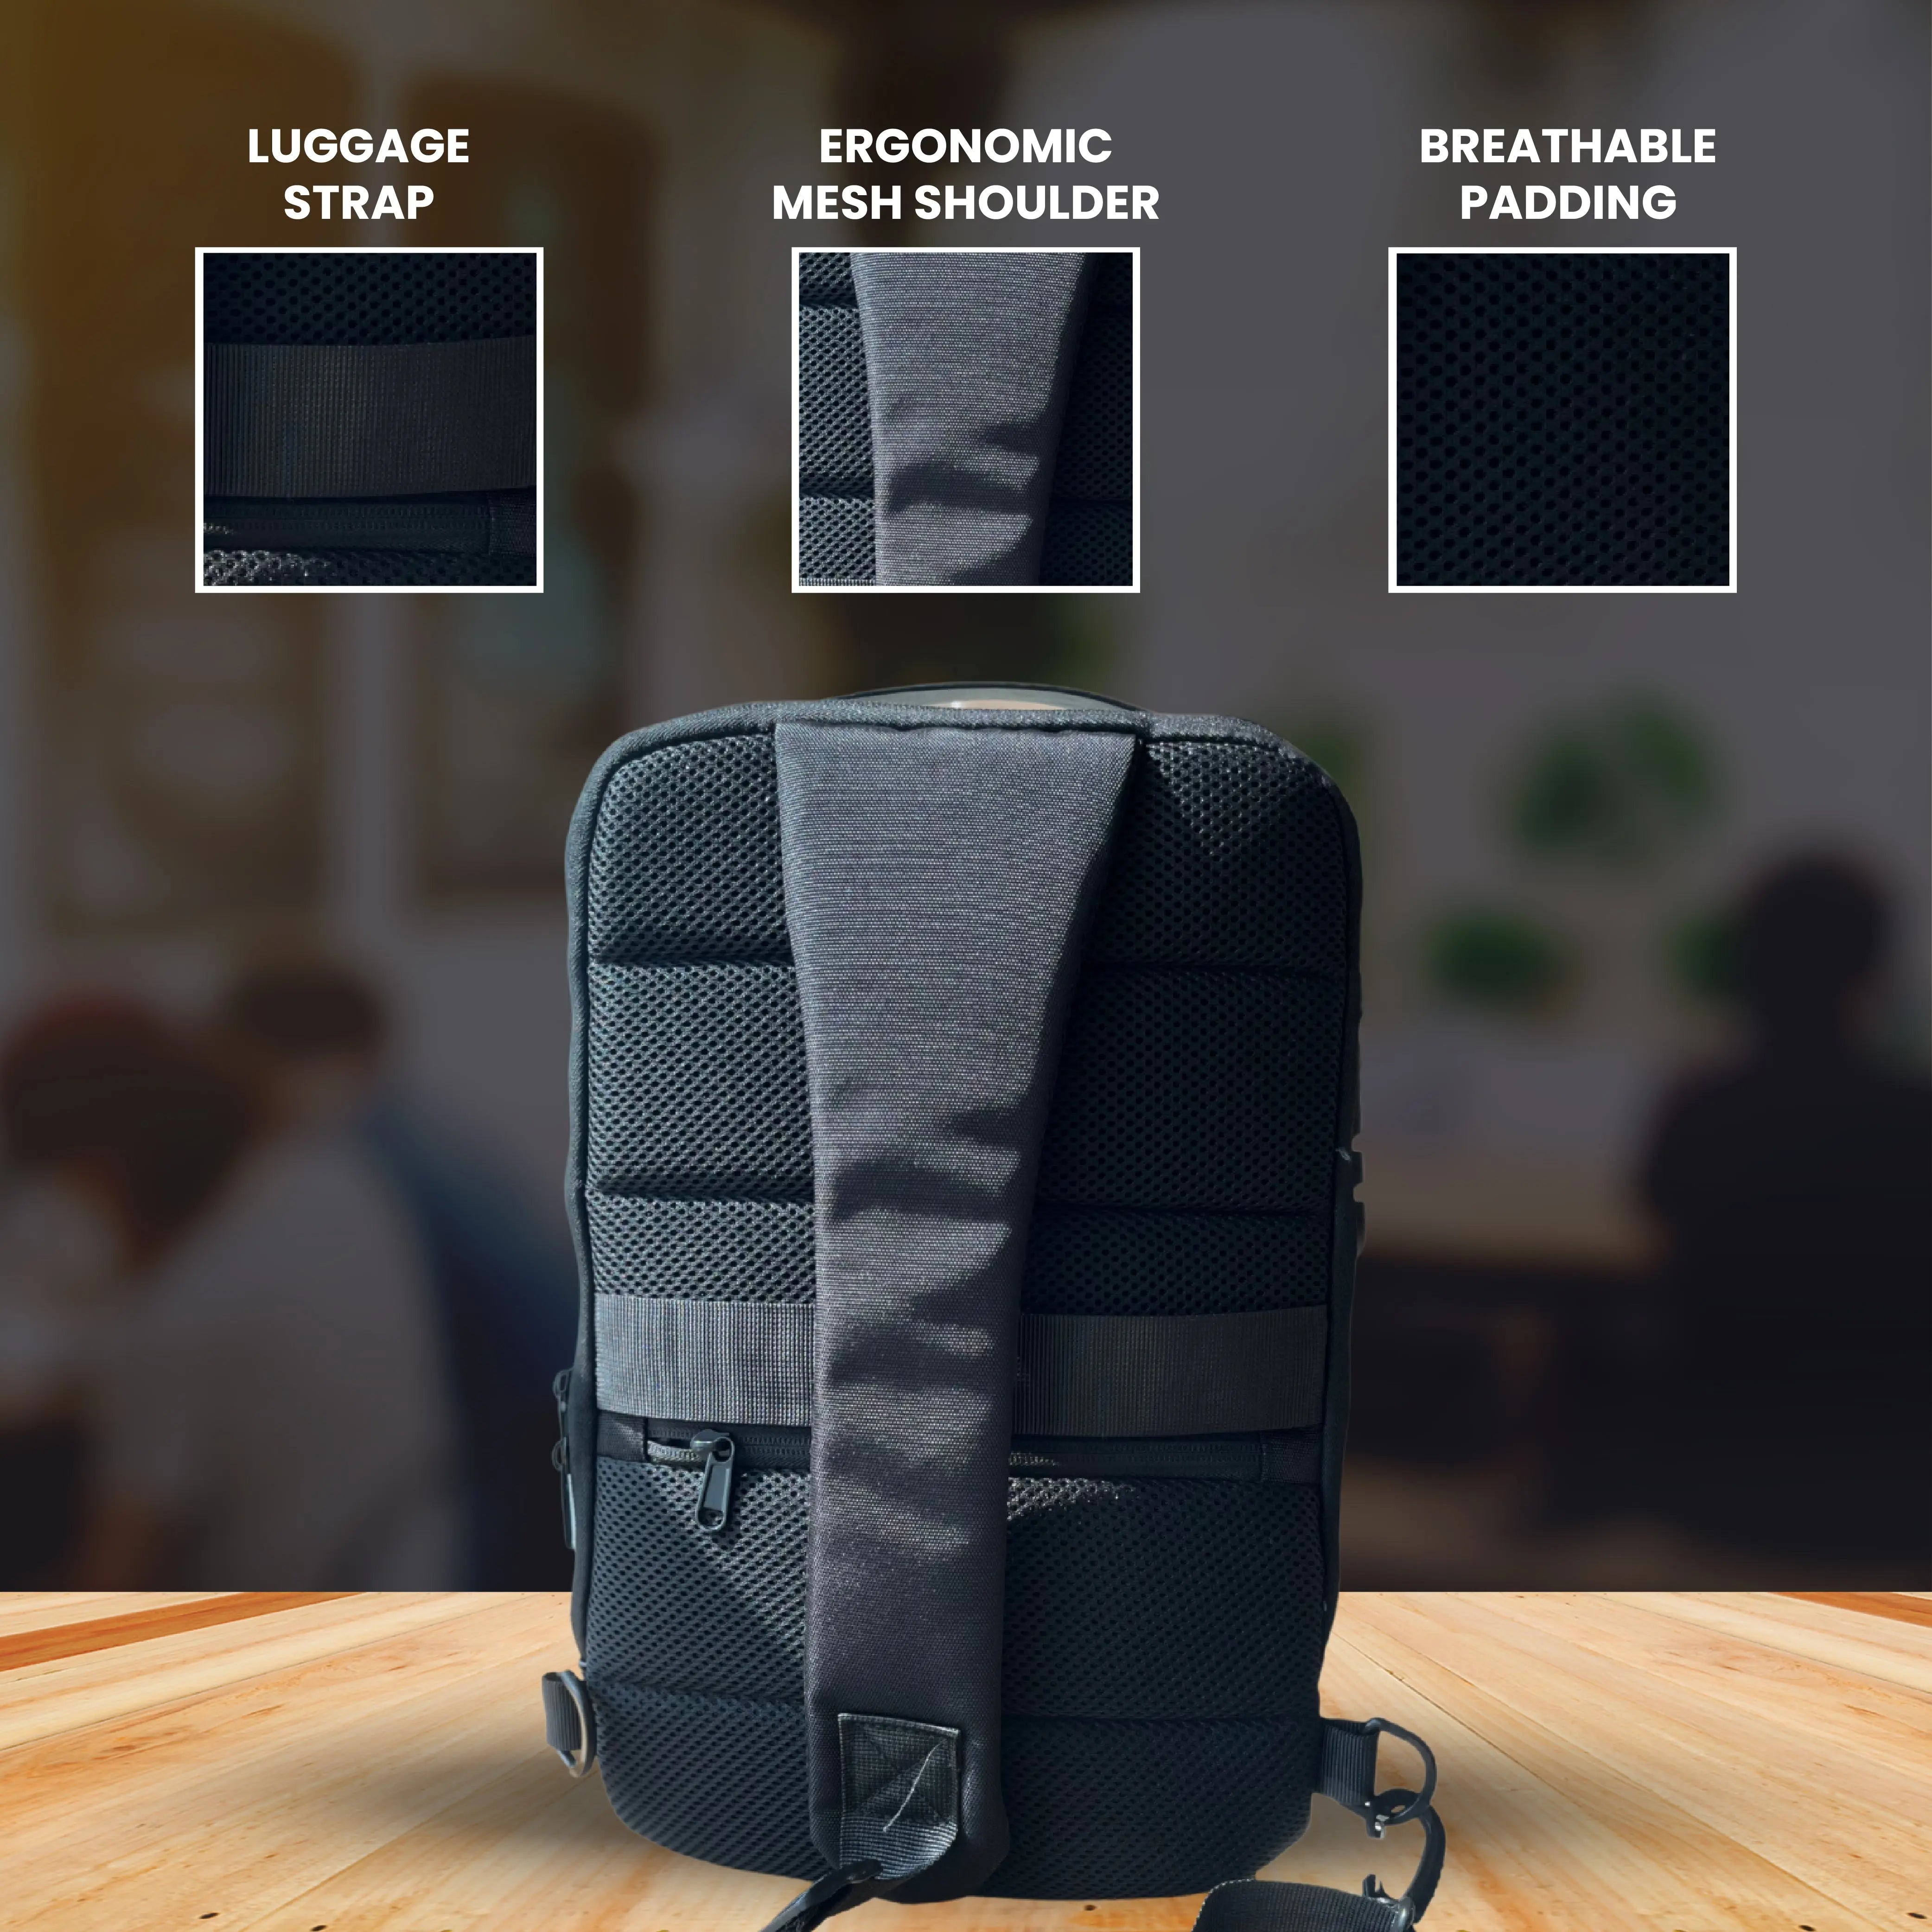 PACKEAZY - EVERYDAY SLING BAG FOR THE MODERN TRAVELER napEazy